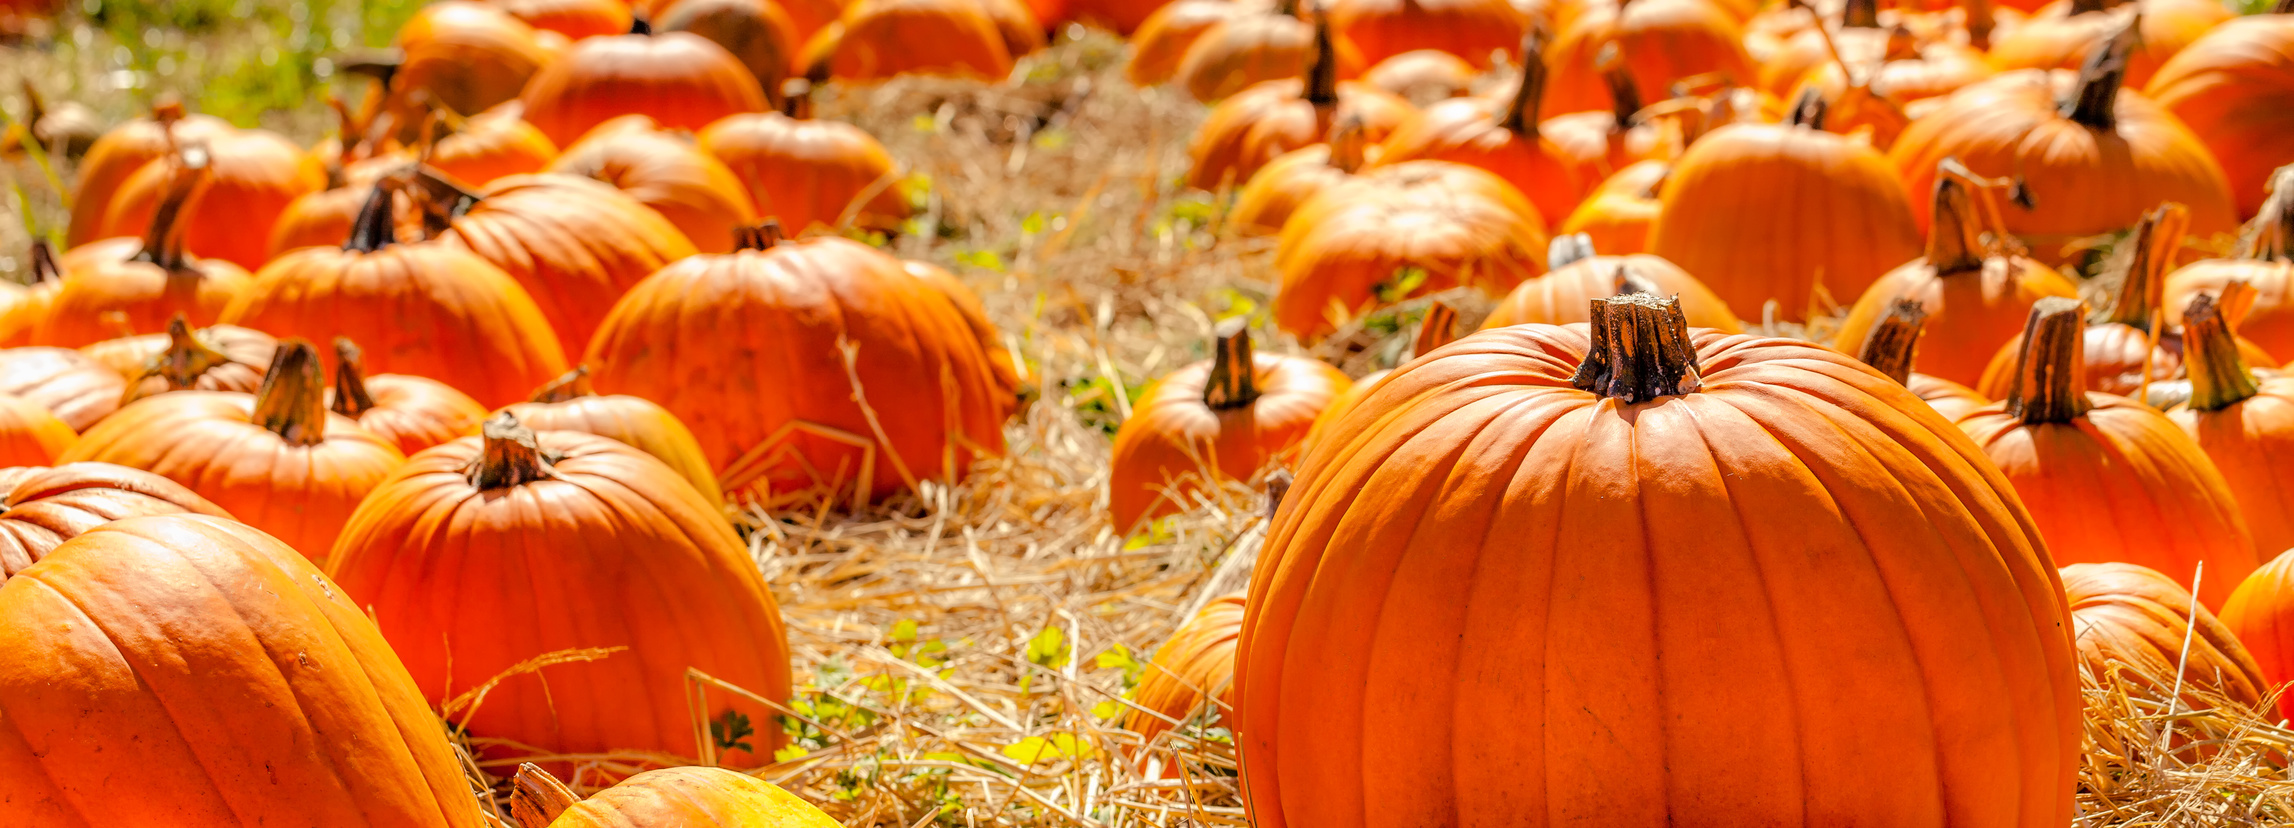 Best Pumpkin Patches On The North Fork!